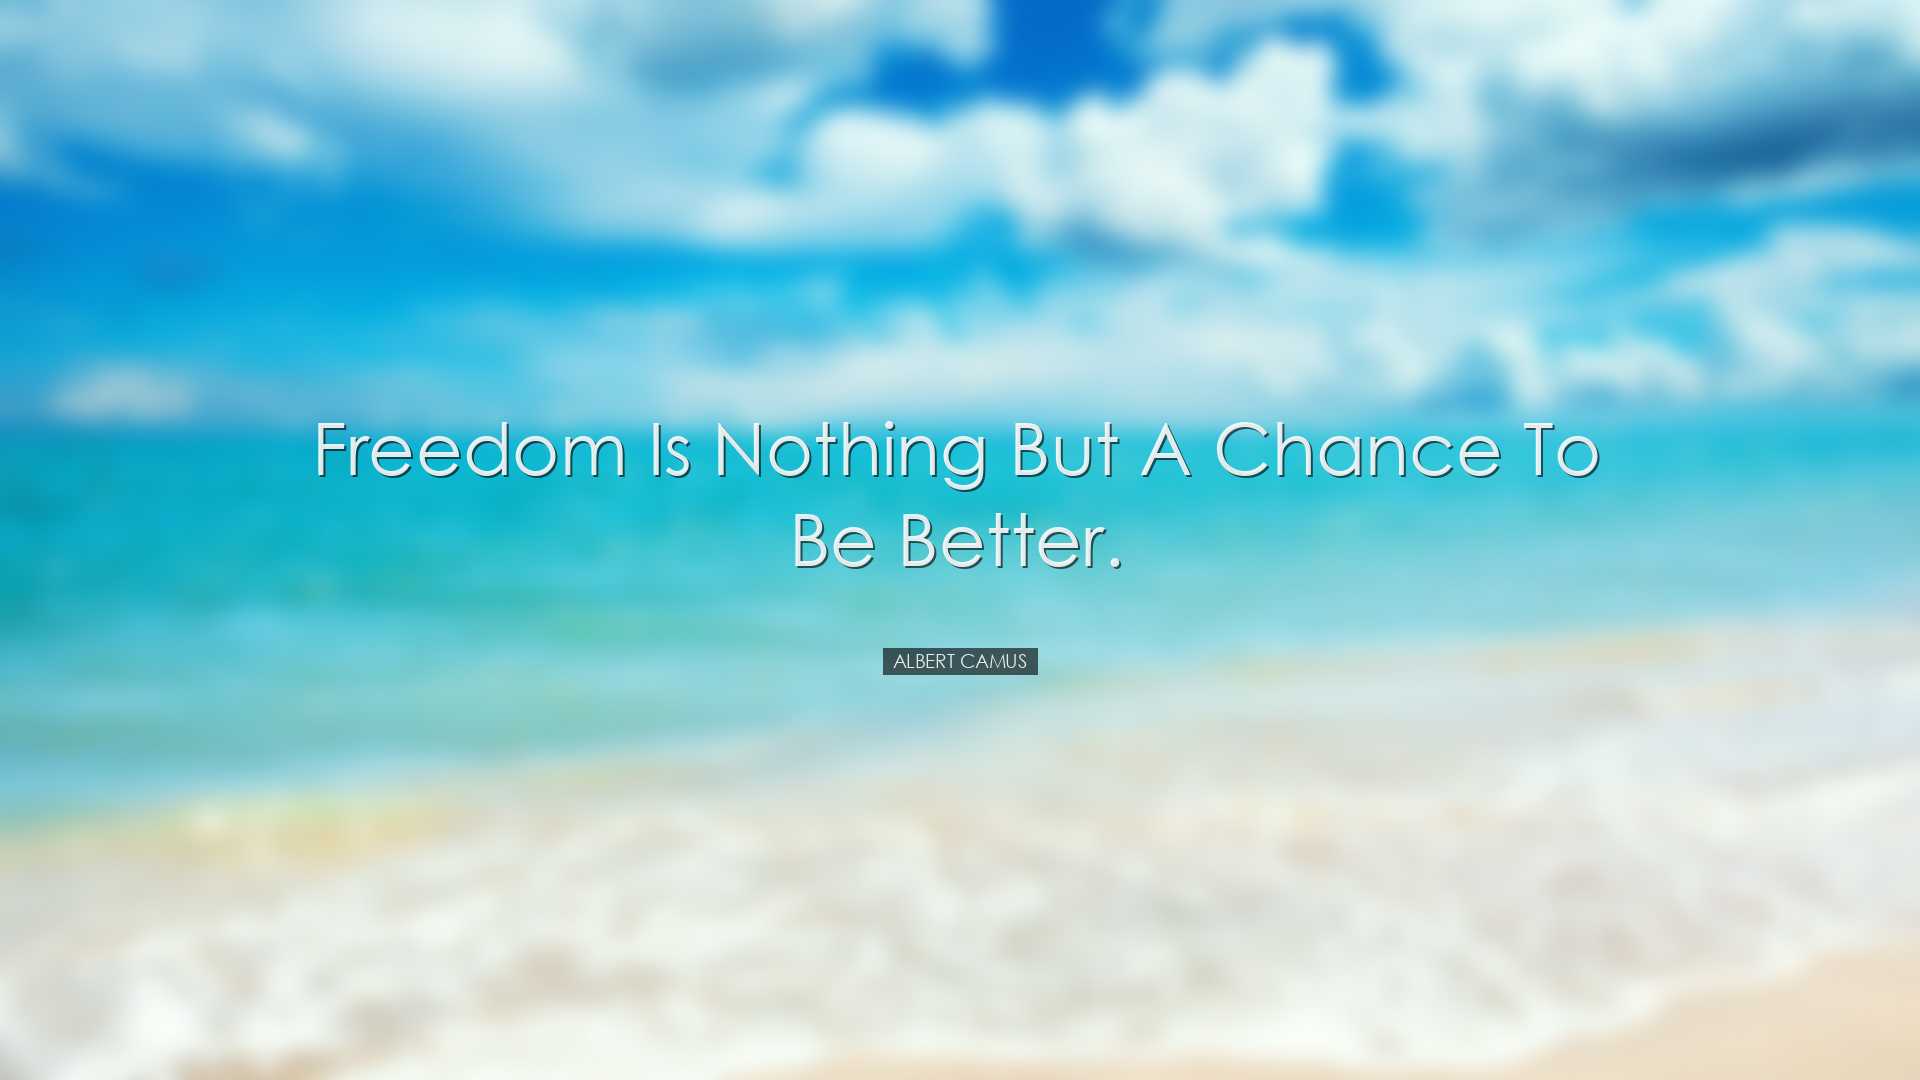 Freedom is nothing but a chance to be better. - Albert Camus